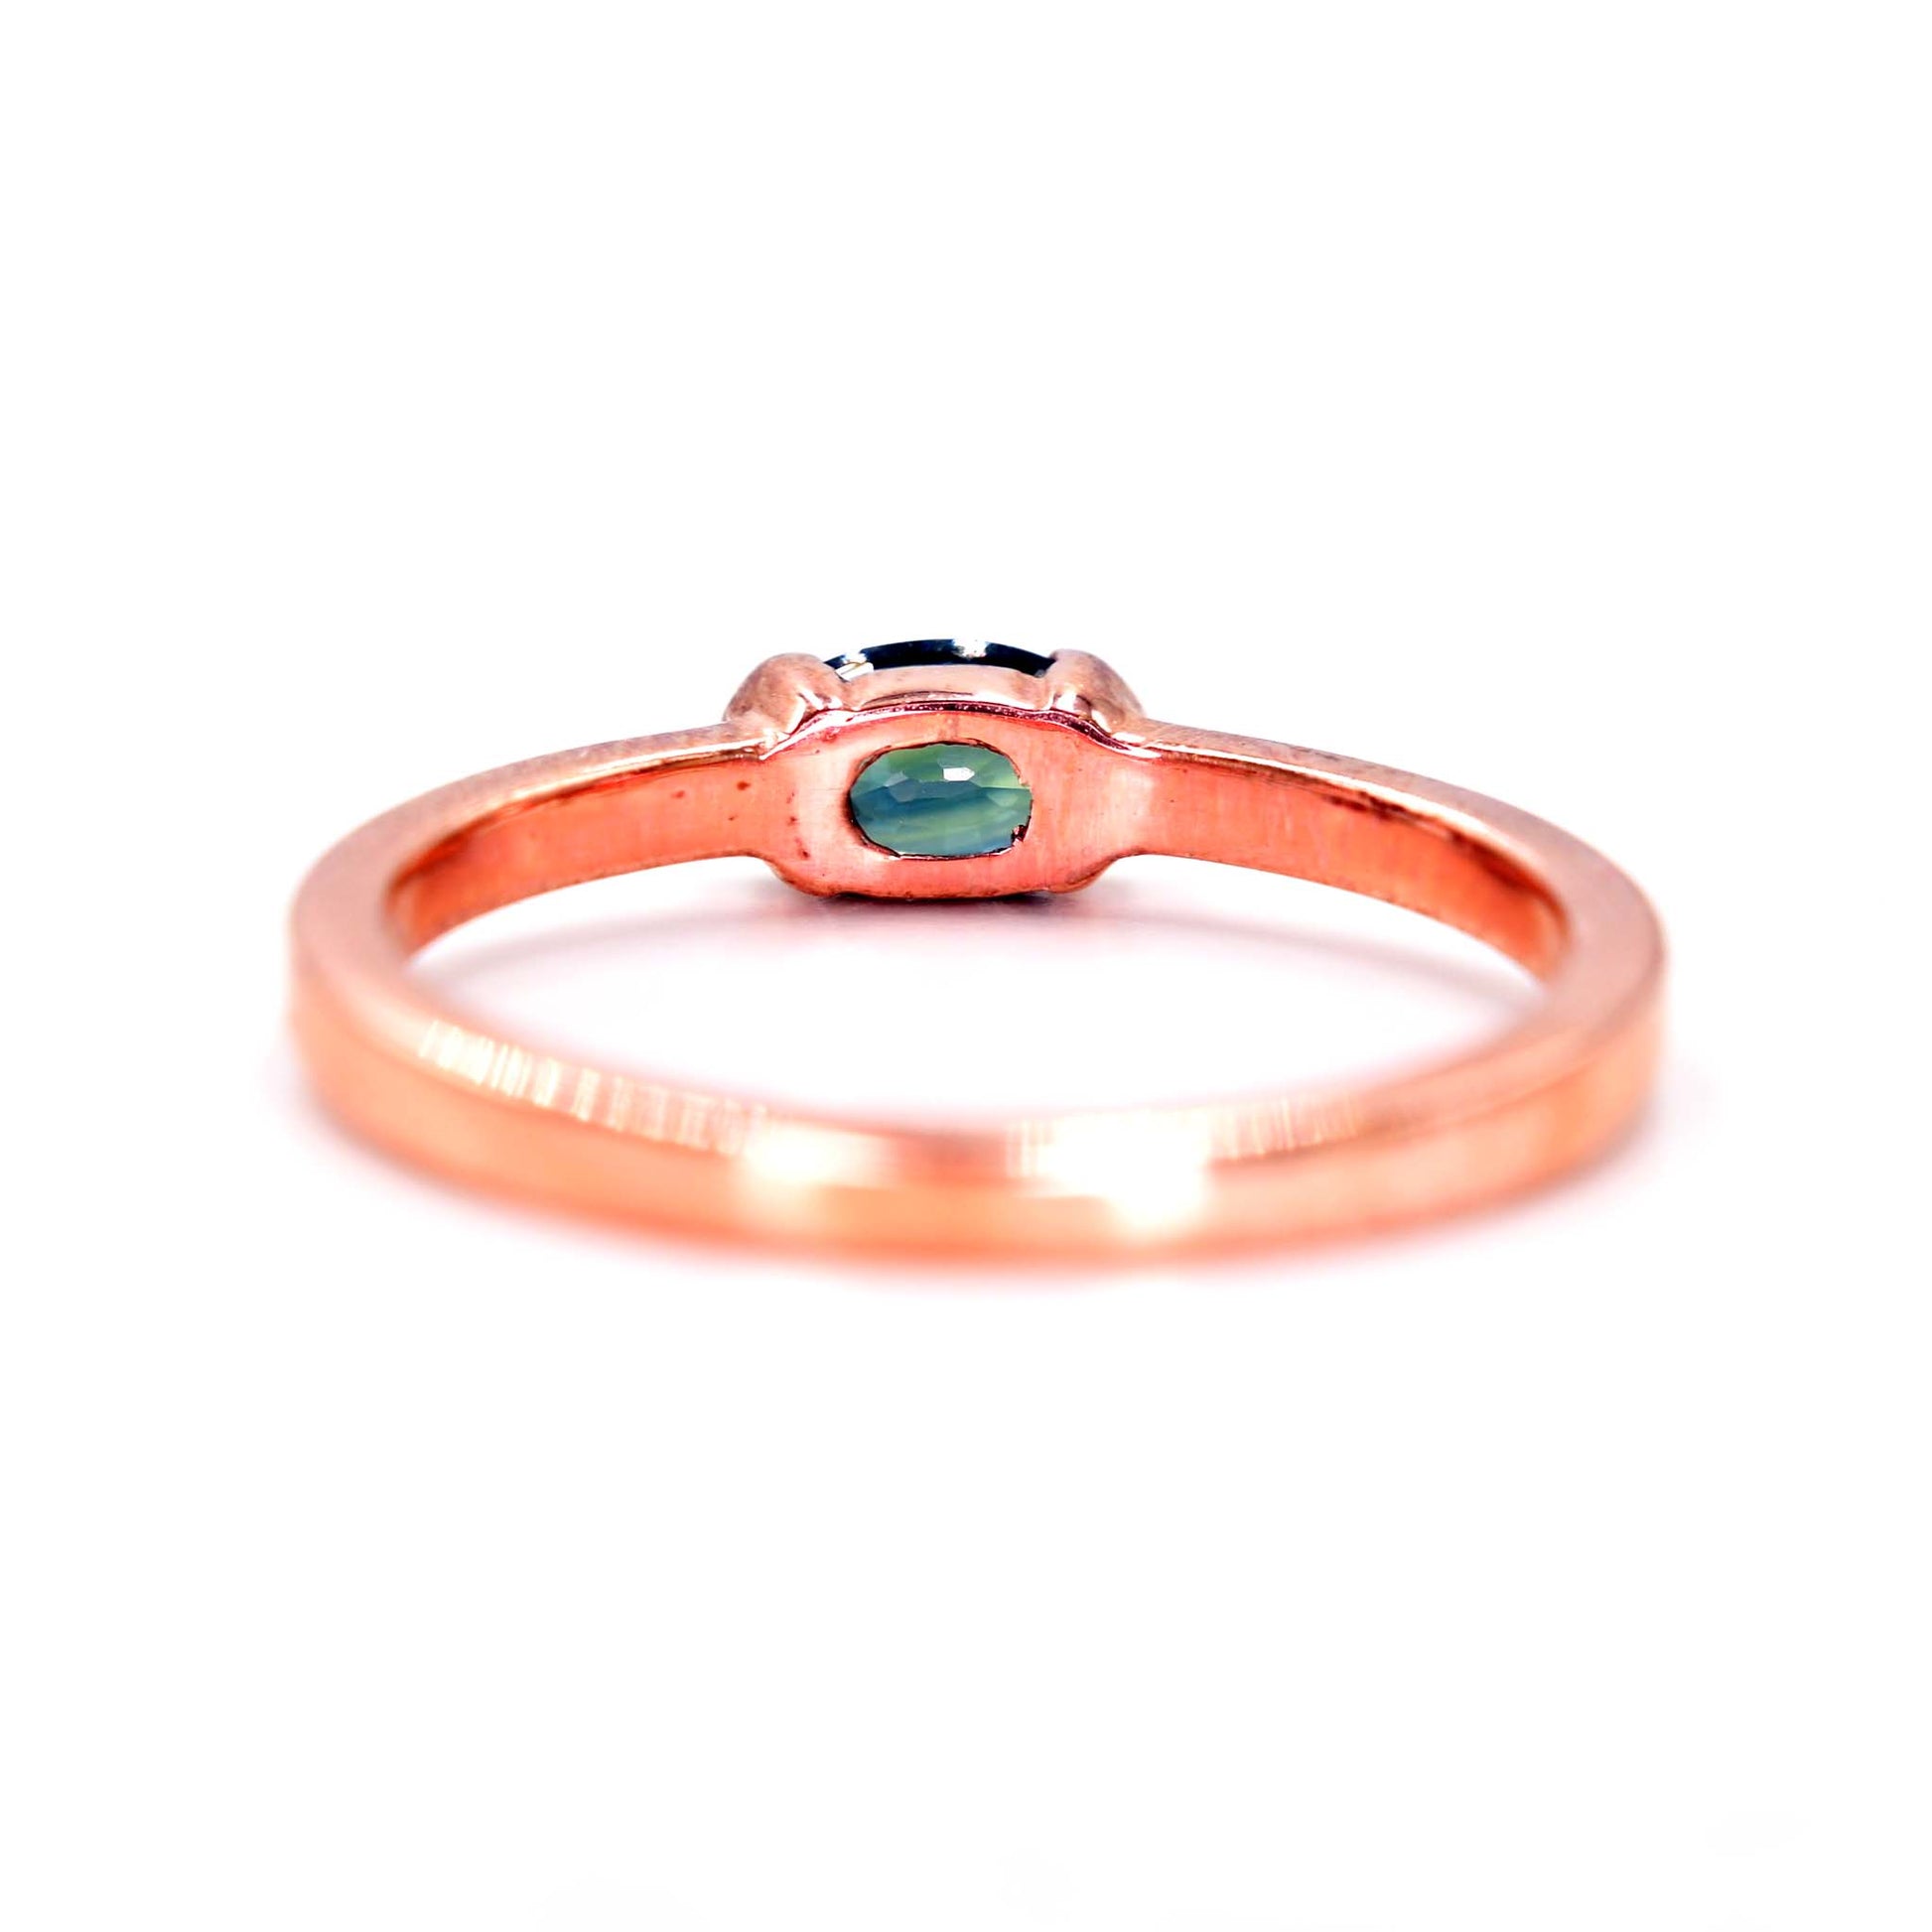 Visit Chiang Mai and get this green sapphire ring in 14k rose gold at the best price